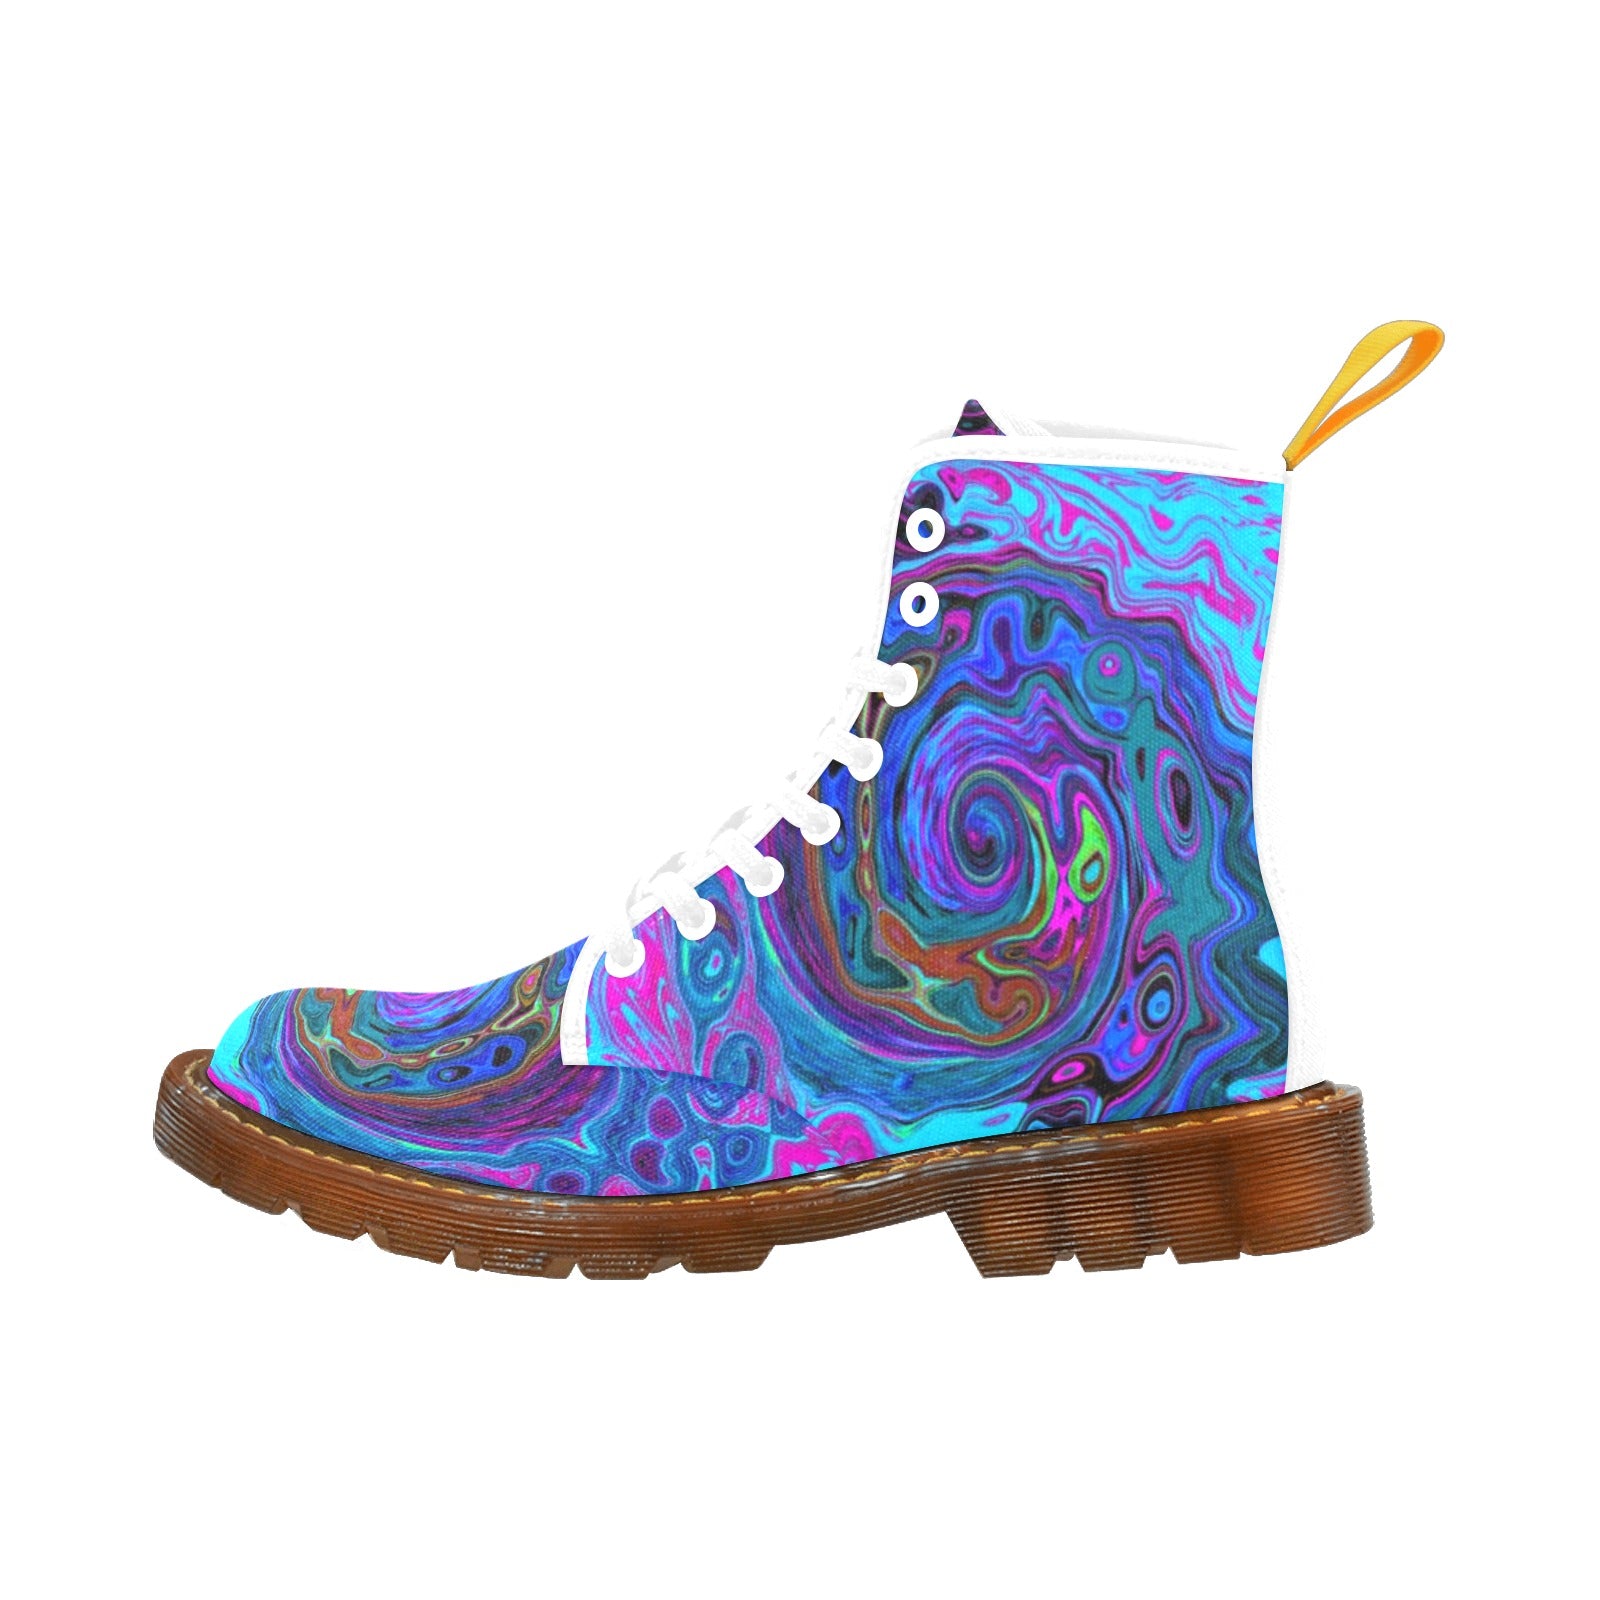 Boots for Women, Groovy Abstract Retro Blue and Purple Swirl - White